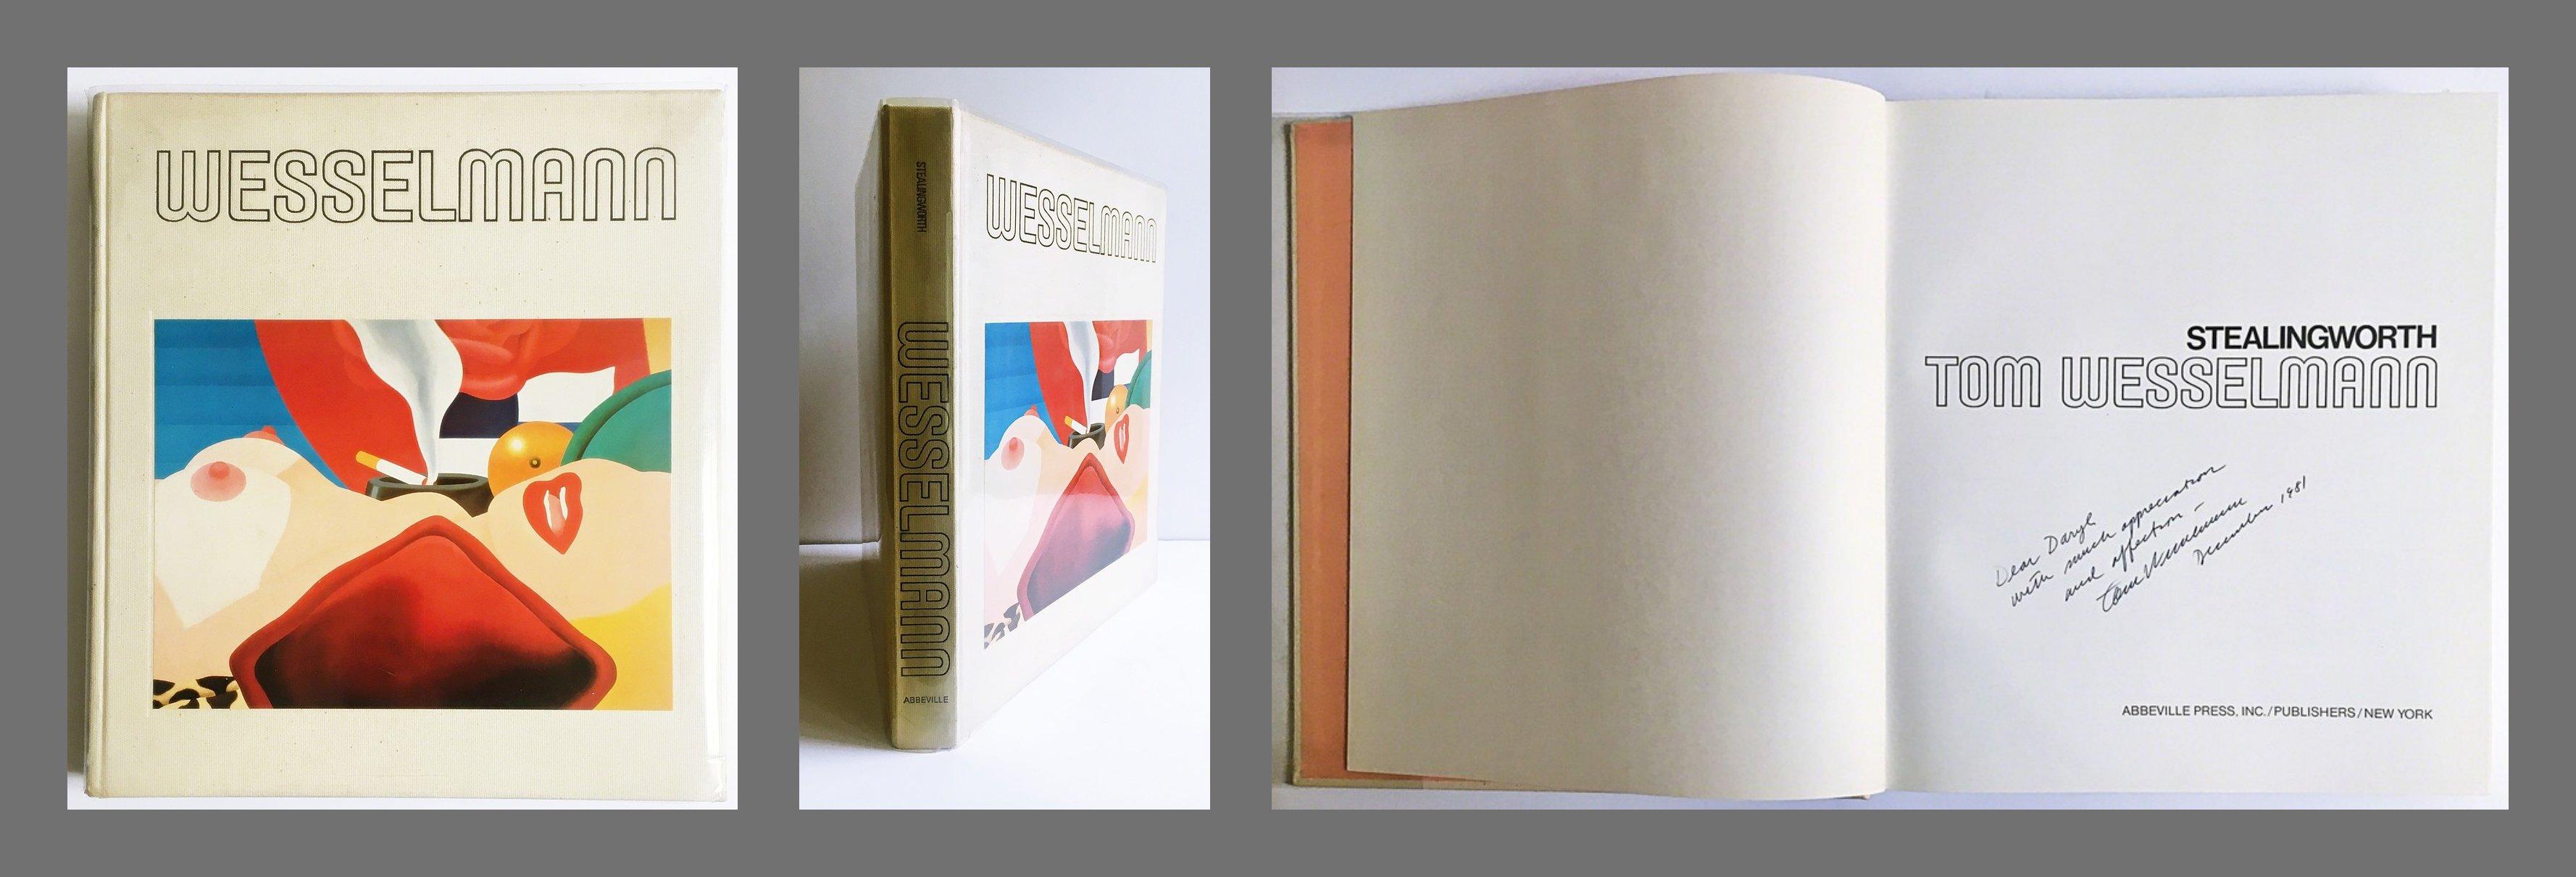 Tom Wesselmann
Tom Wesselmann (Hand Signed and Warmly Inscribed by Tom Wesselmann), 1980
Hardback Monograph
Hand signed, dated and warmly inscribed by Tom Wesselmann.
13 1/2 × 12 × 1 1/2 in
Unframed
This beautiful hardback monograph is a catalogue